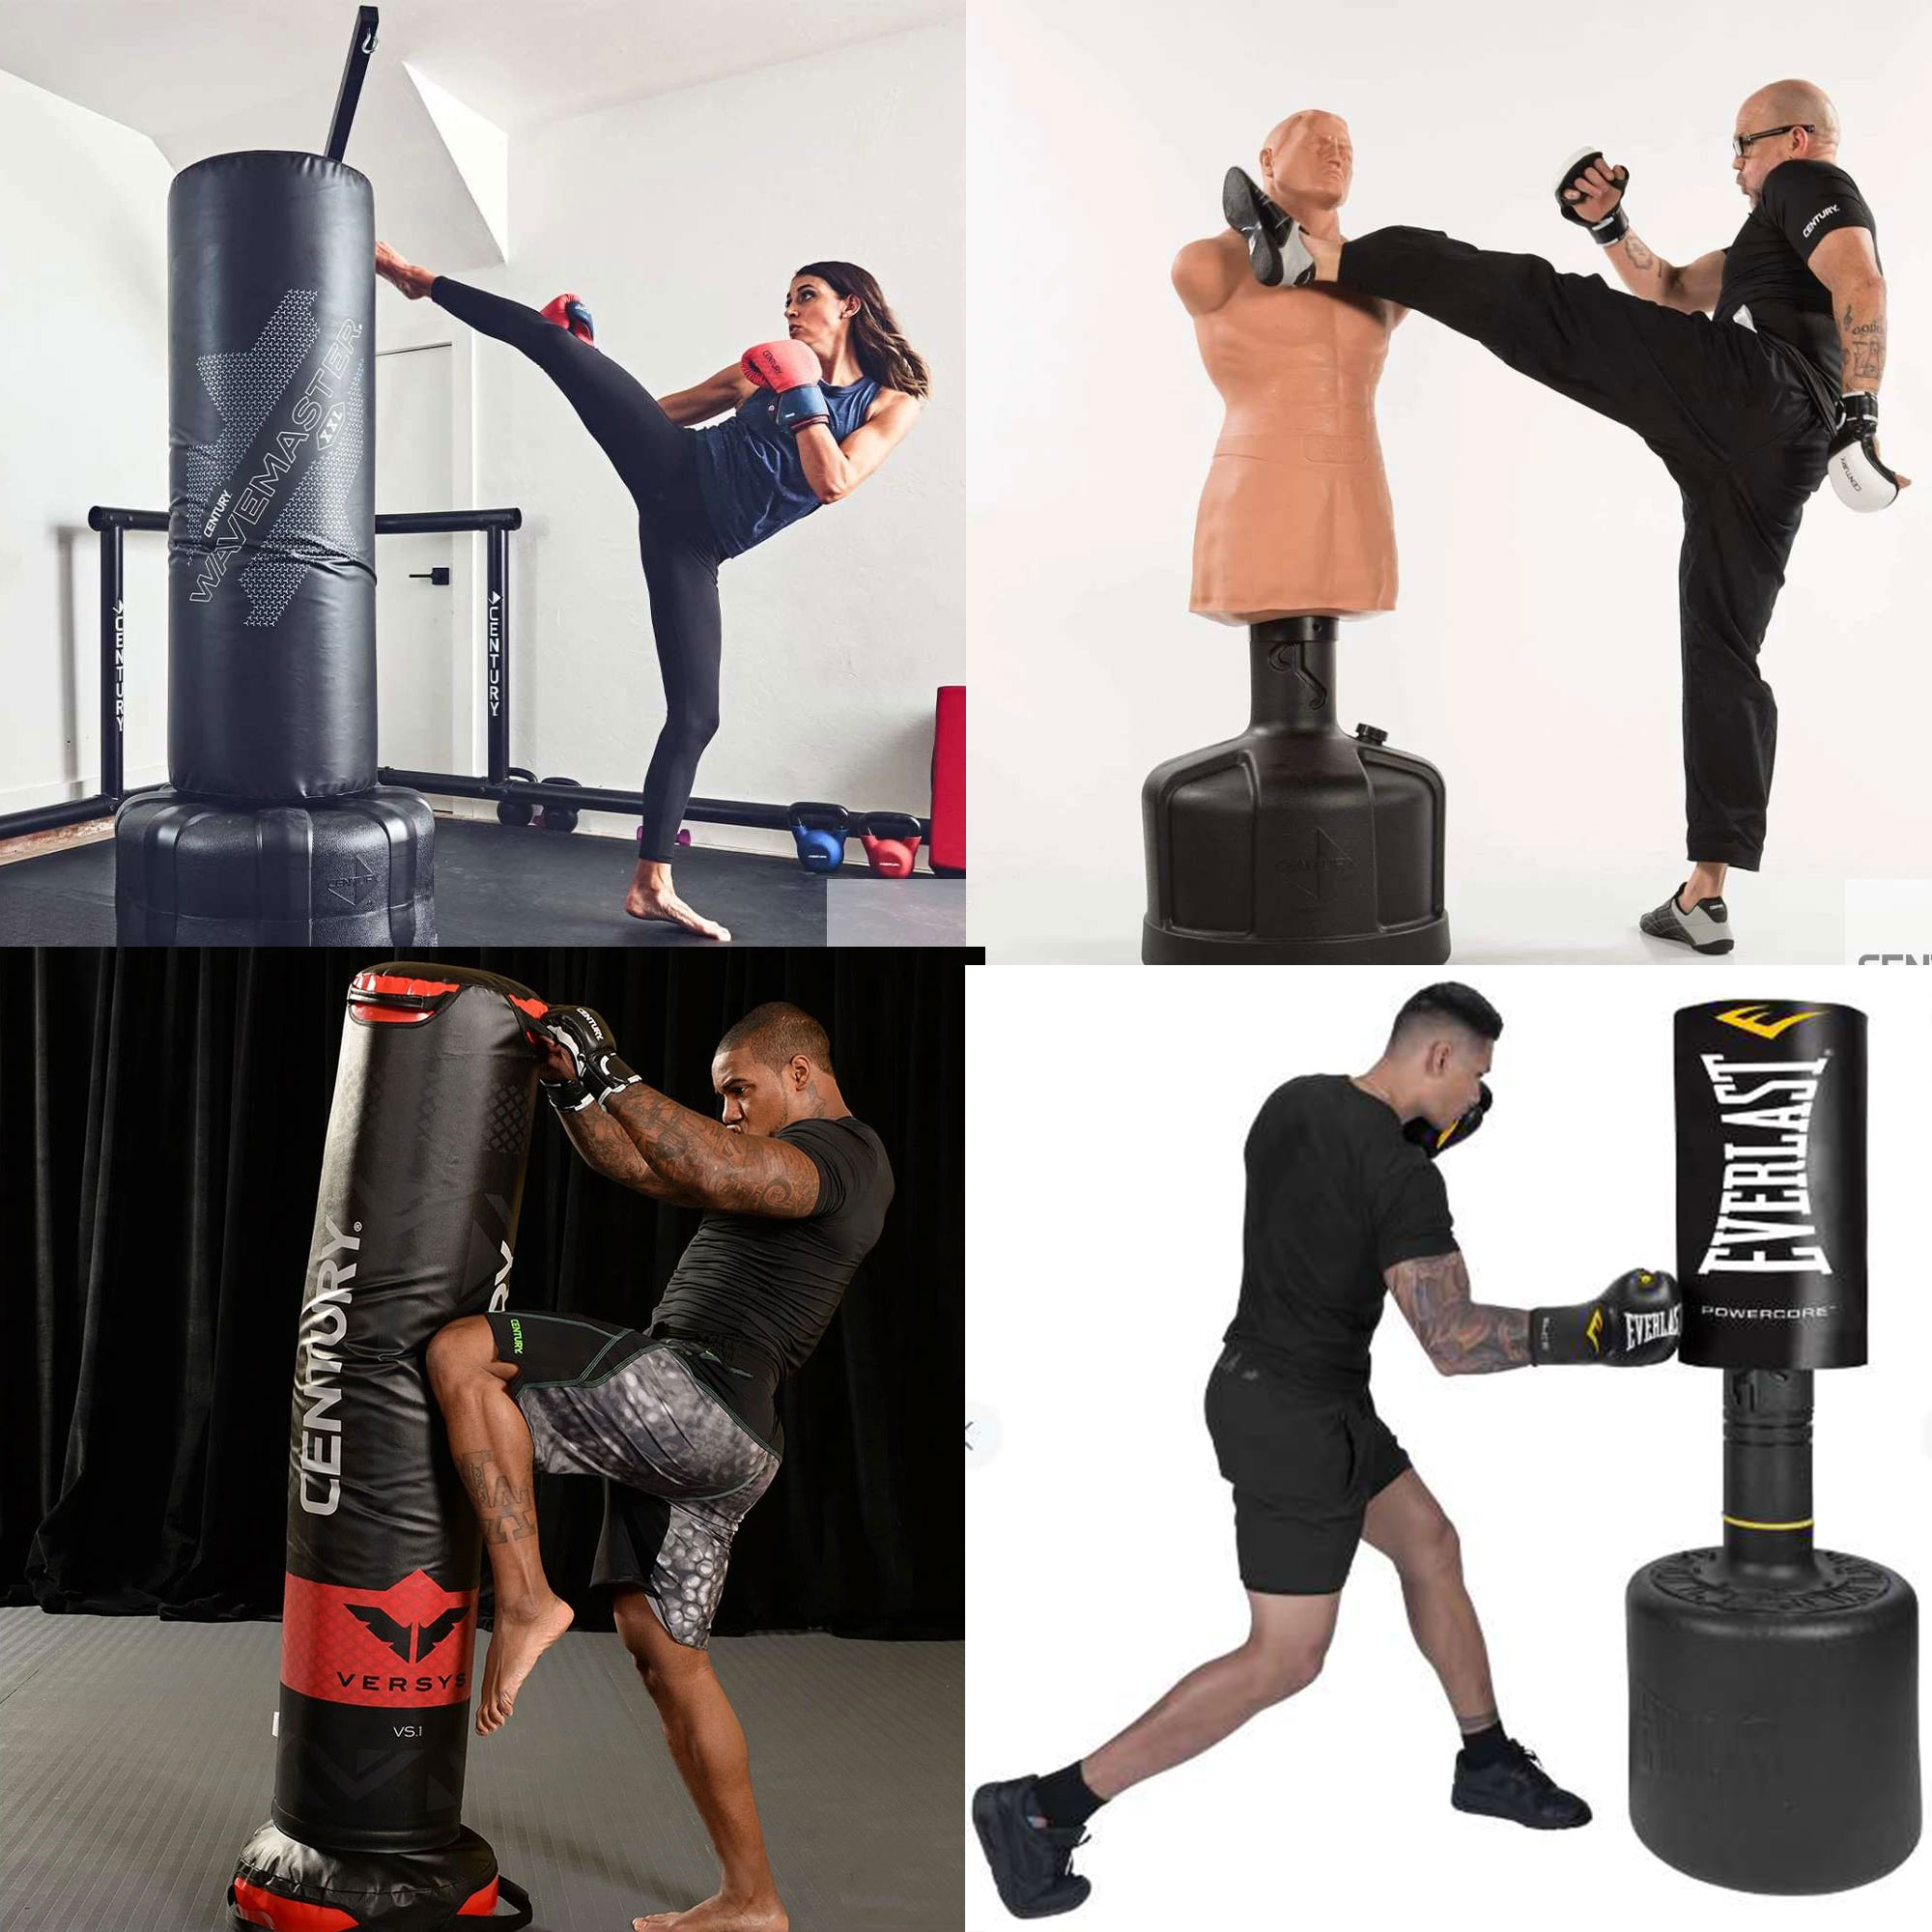 Different freestanding punchingbags